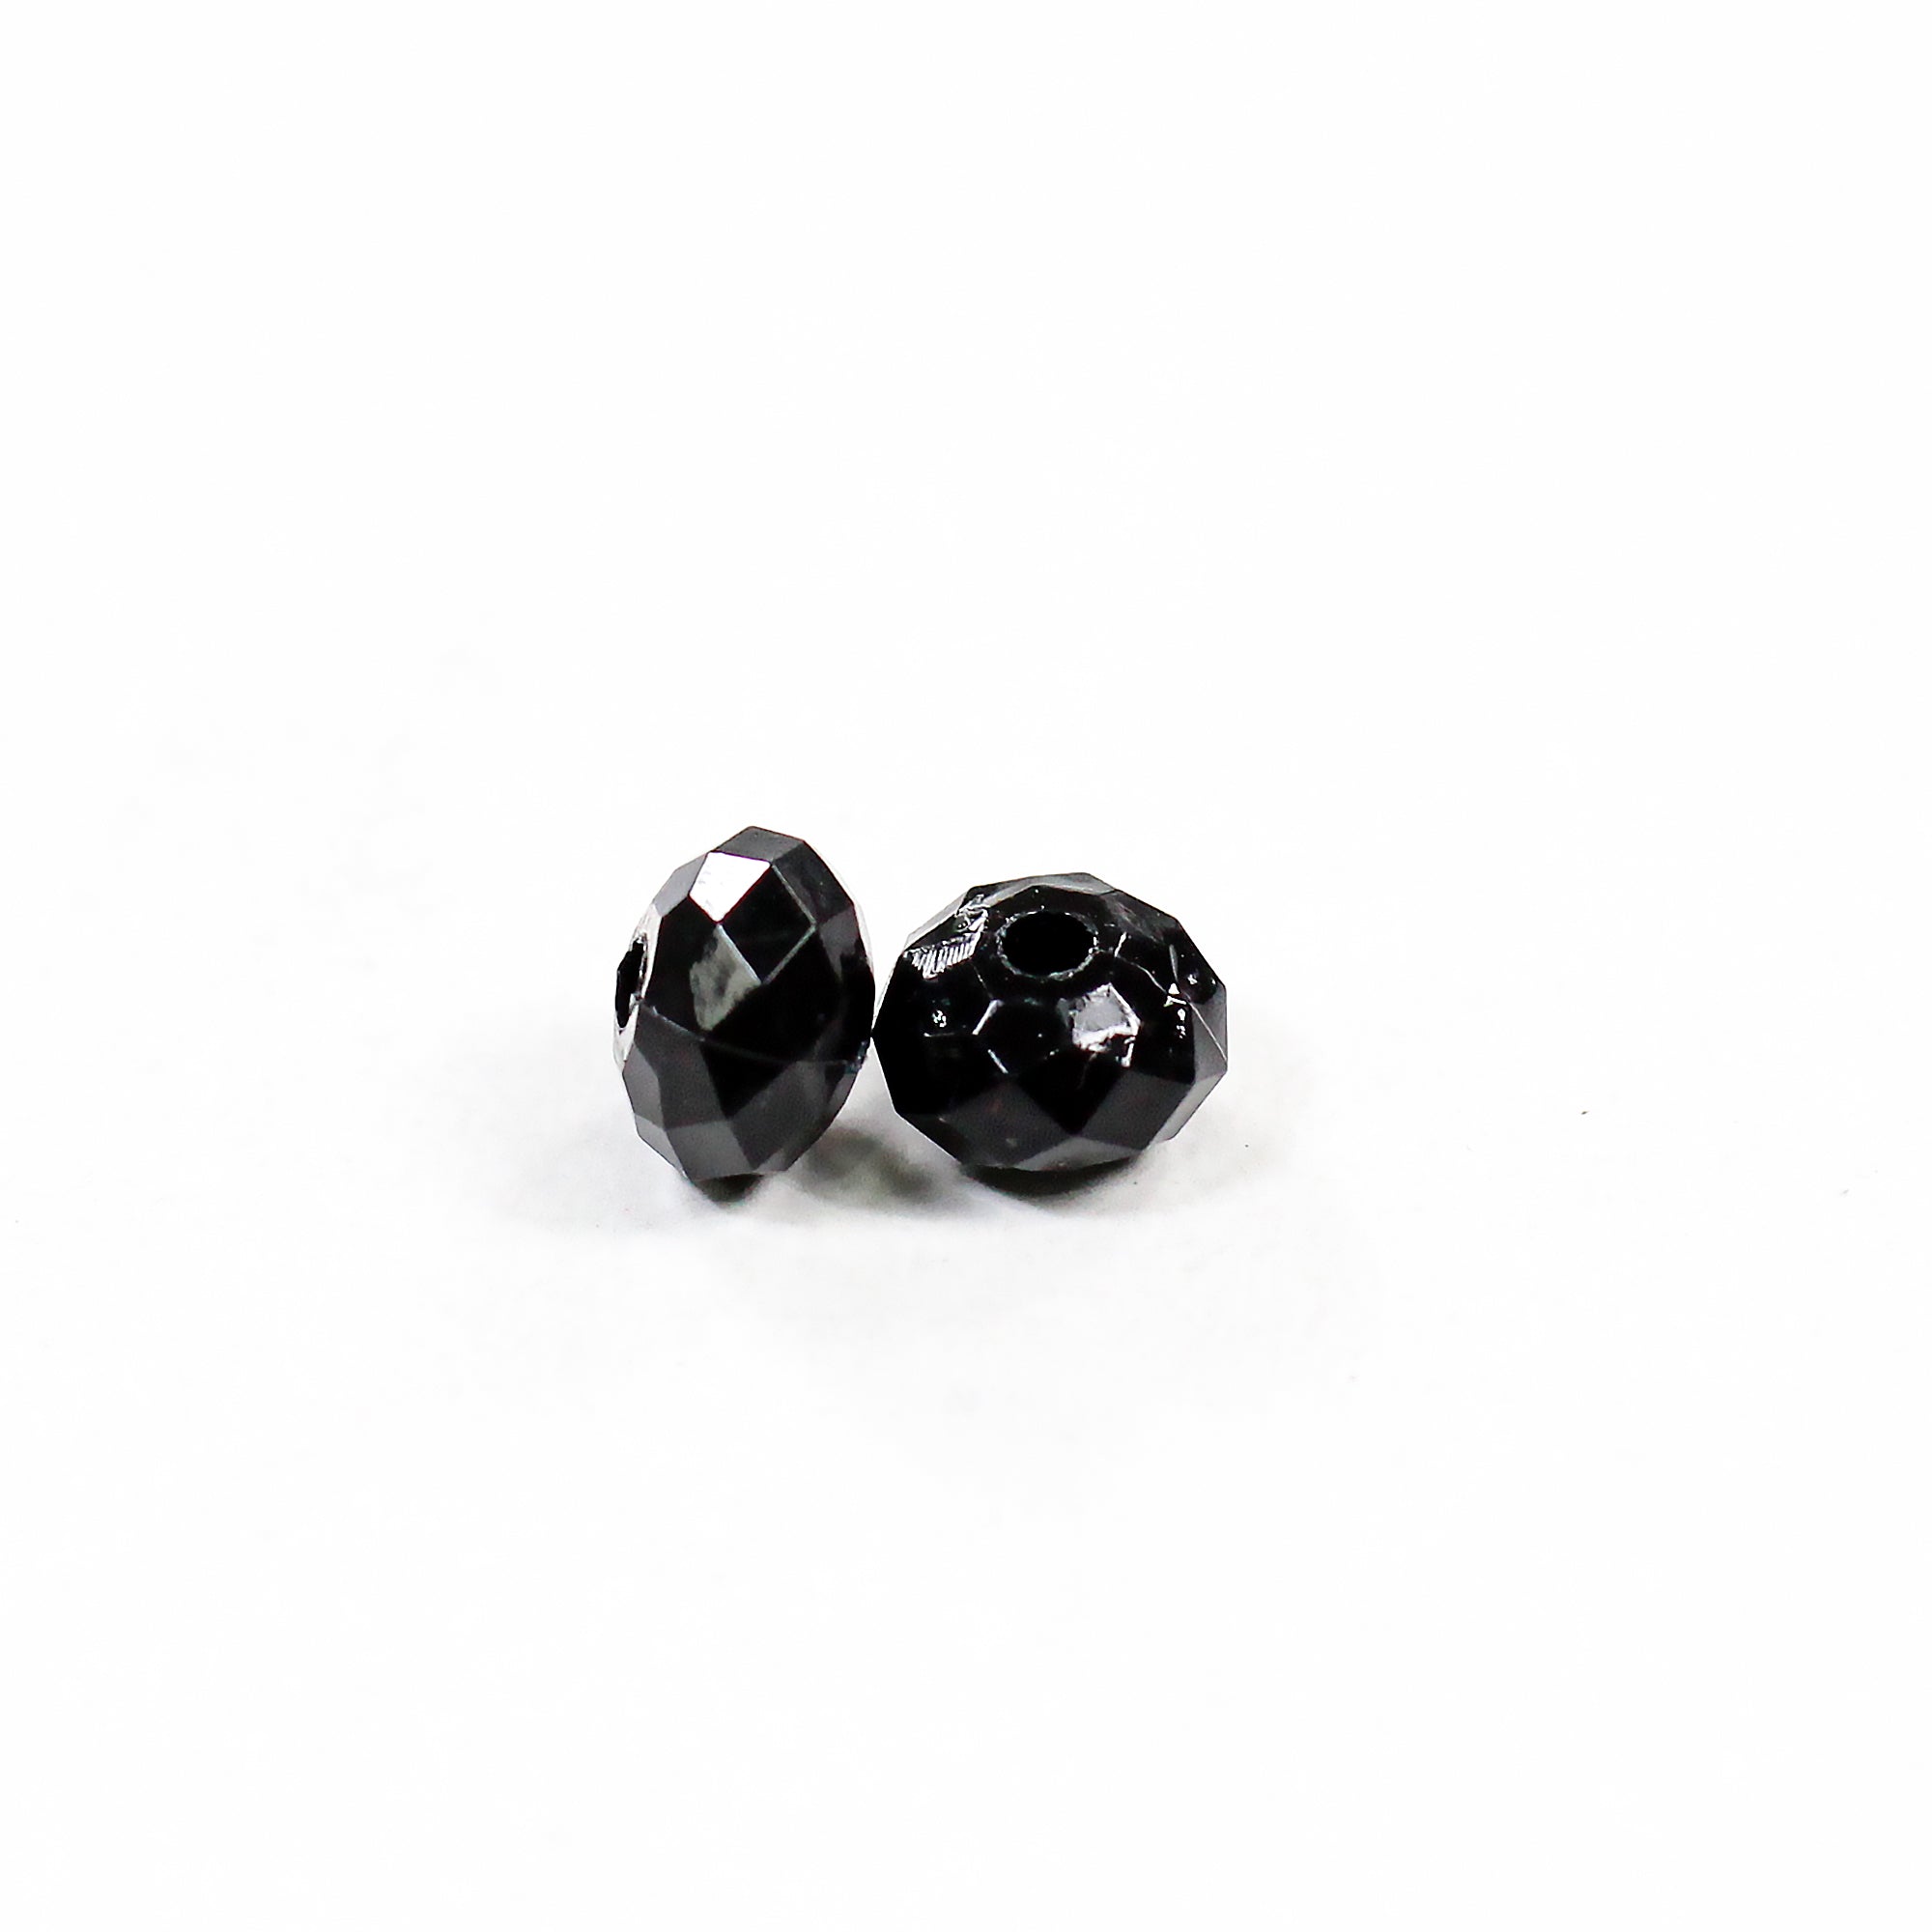 Beads Glossy Black Faceted Small Round 8Mm X 5Mm 30G Pb Ib